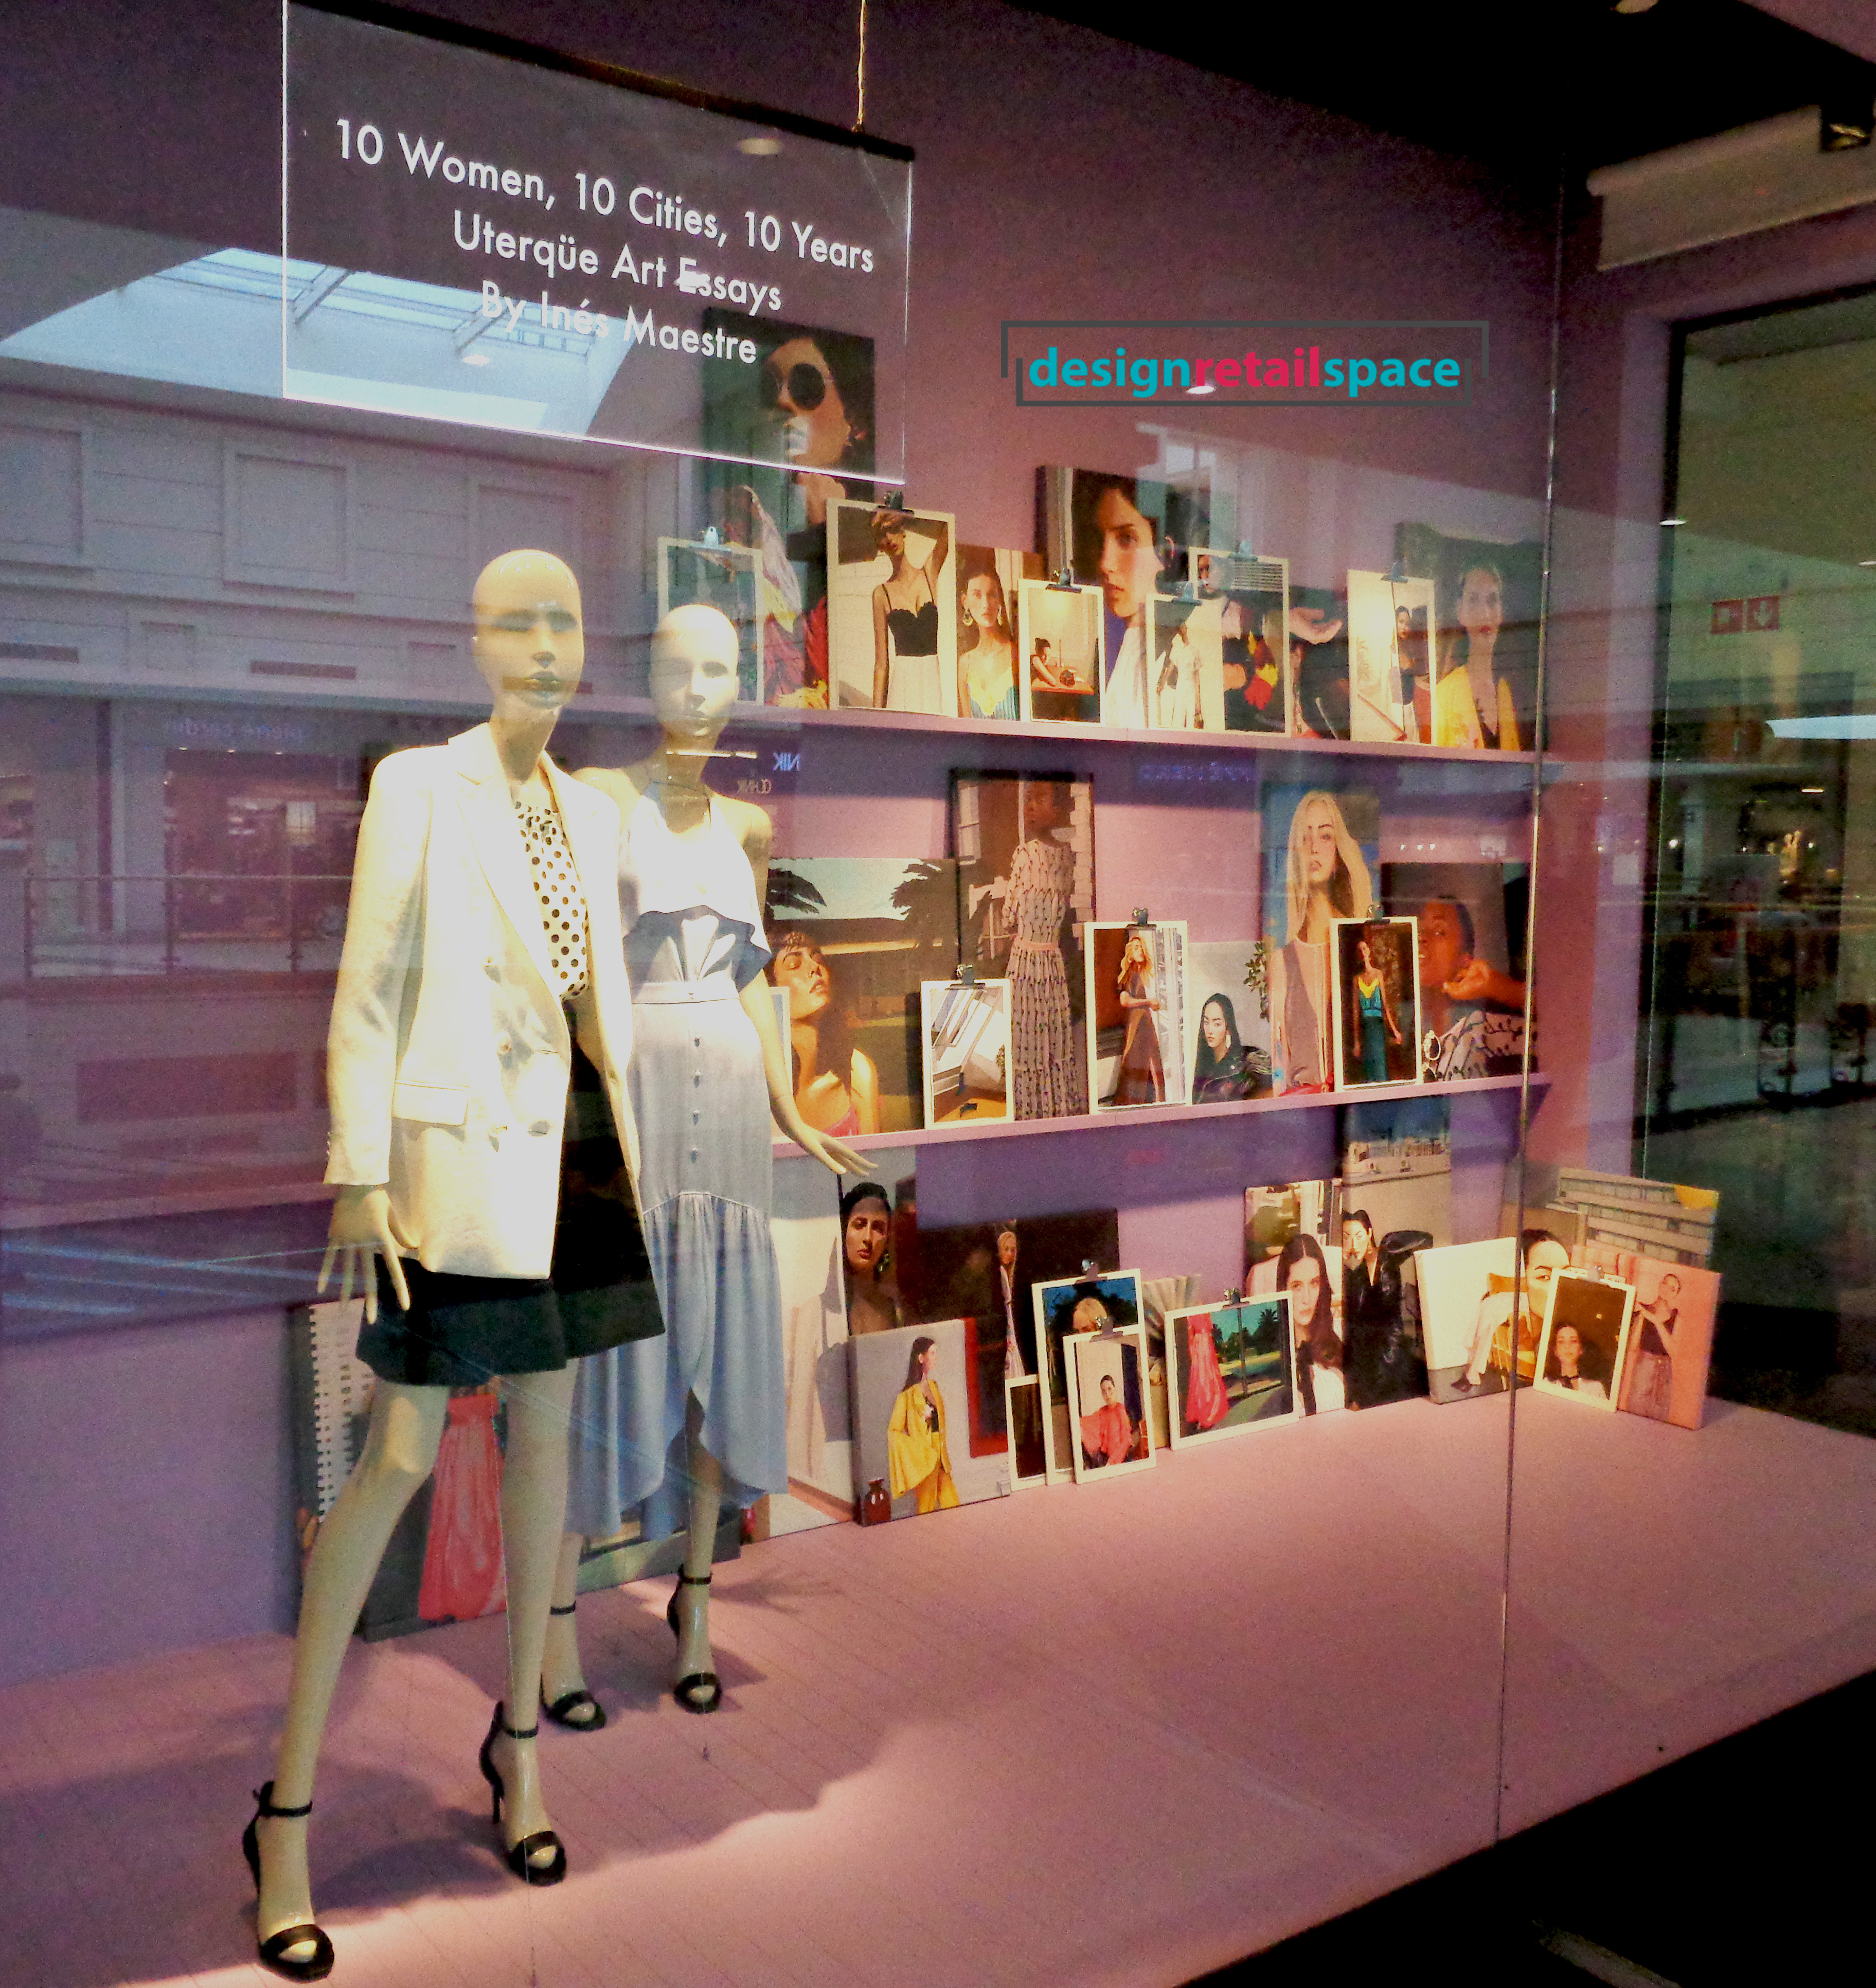 Uterque window display showing portraits of women against Millennial pink background